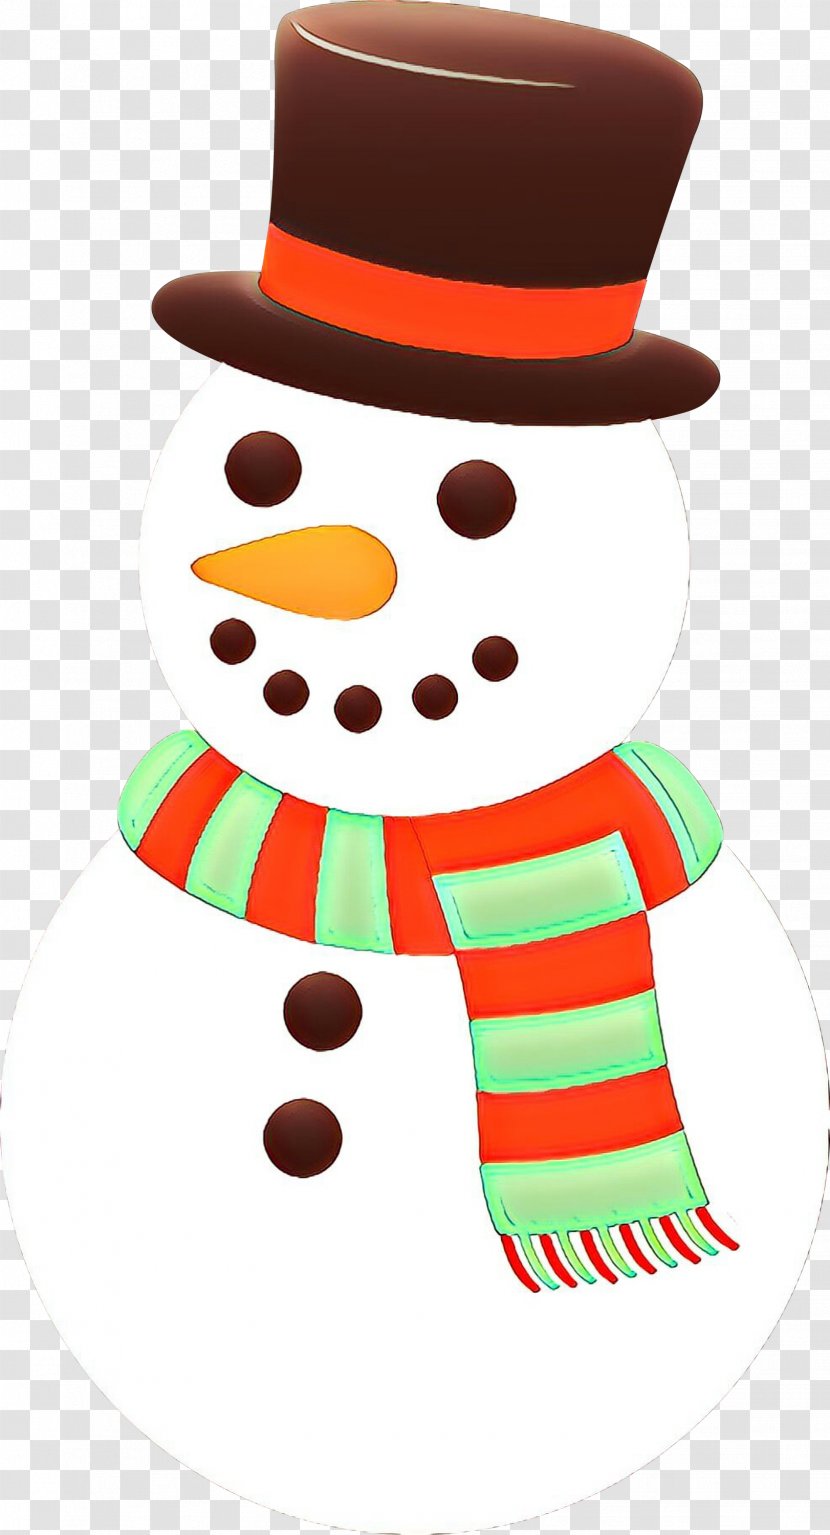 Snowman Christmas Day Clip Art Illustration Vector Graphics - Tree Transparent PNG